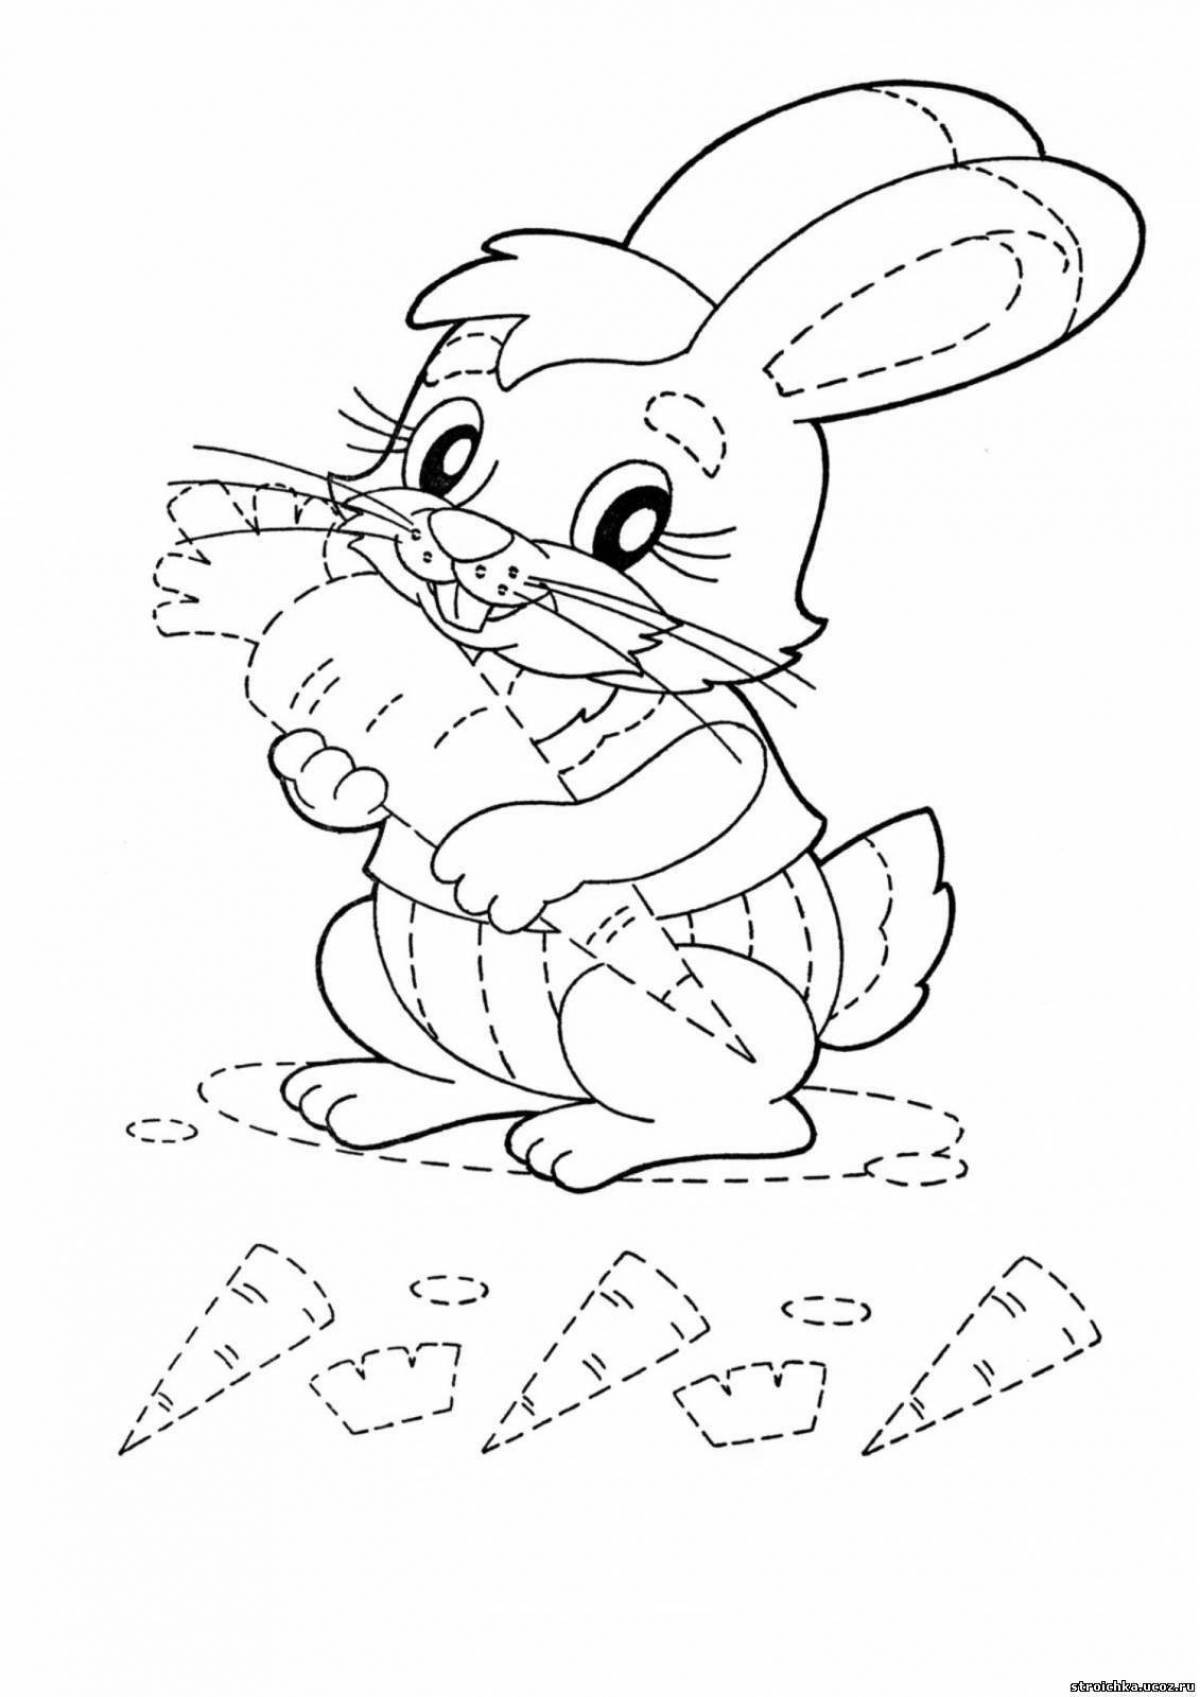 Funny bunny coloring book